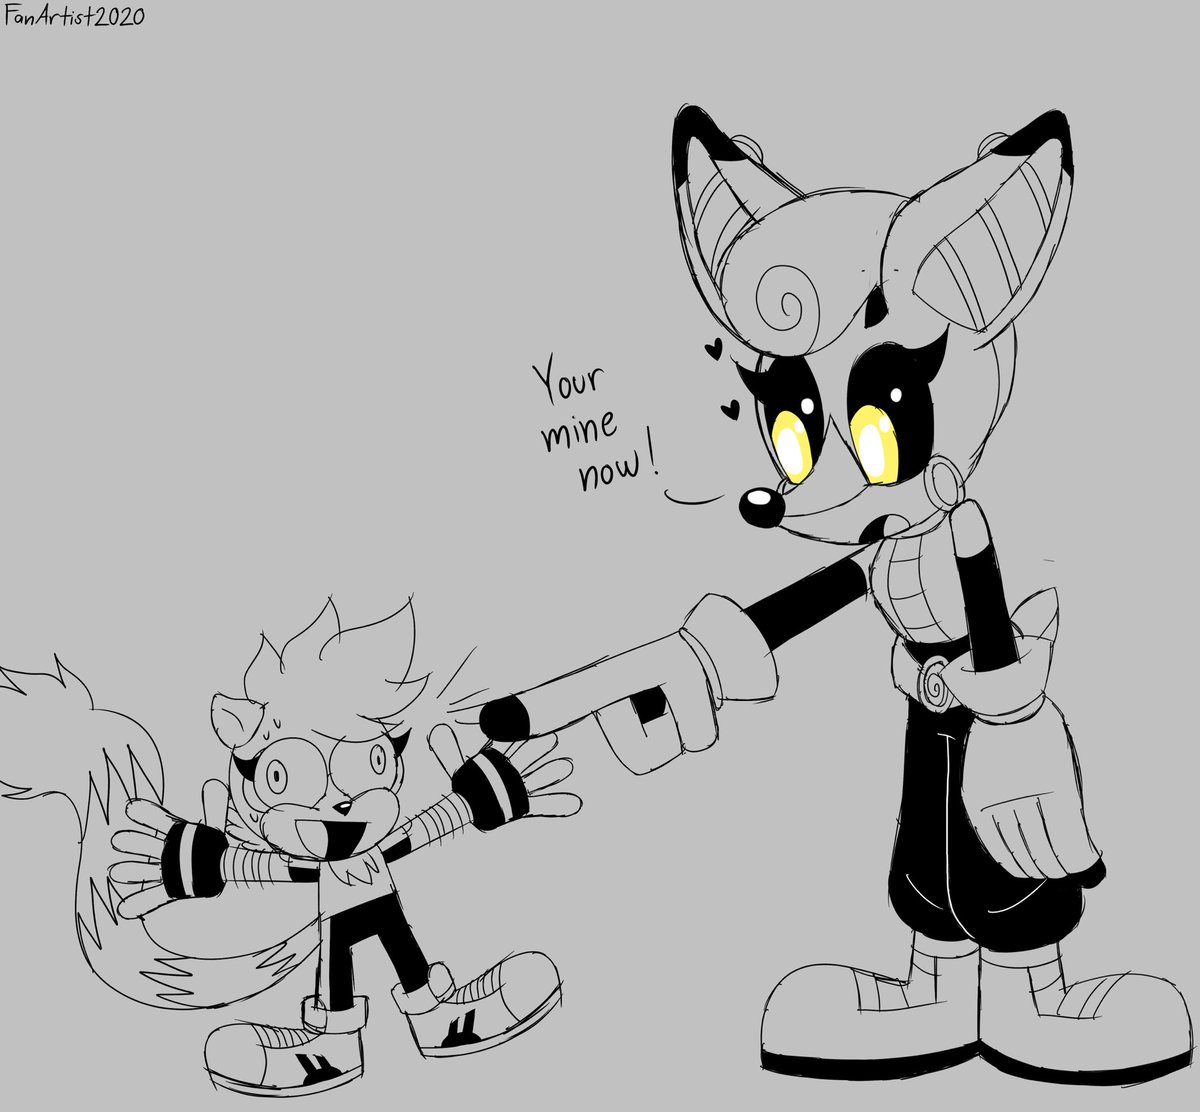 How Cassia met Tangle, it was love at first sight….for Cassia mostly 💚

#SonicTheHedgehog #SonicIDW #archiesonic #tanglethelemur #cassiathepronghorn